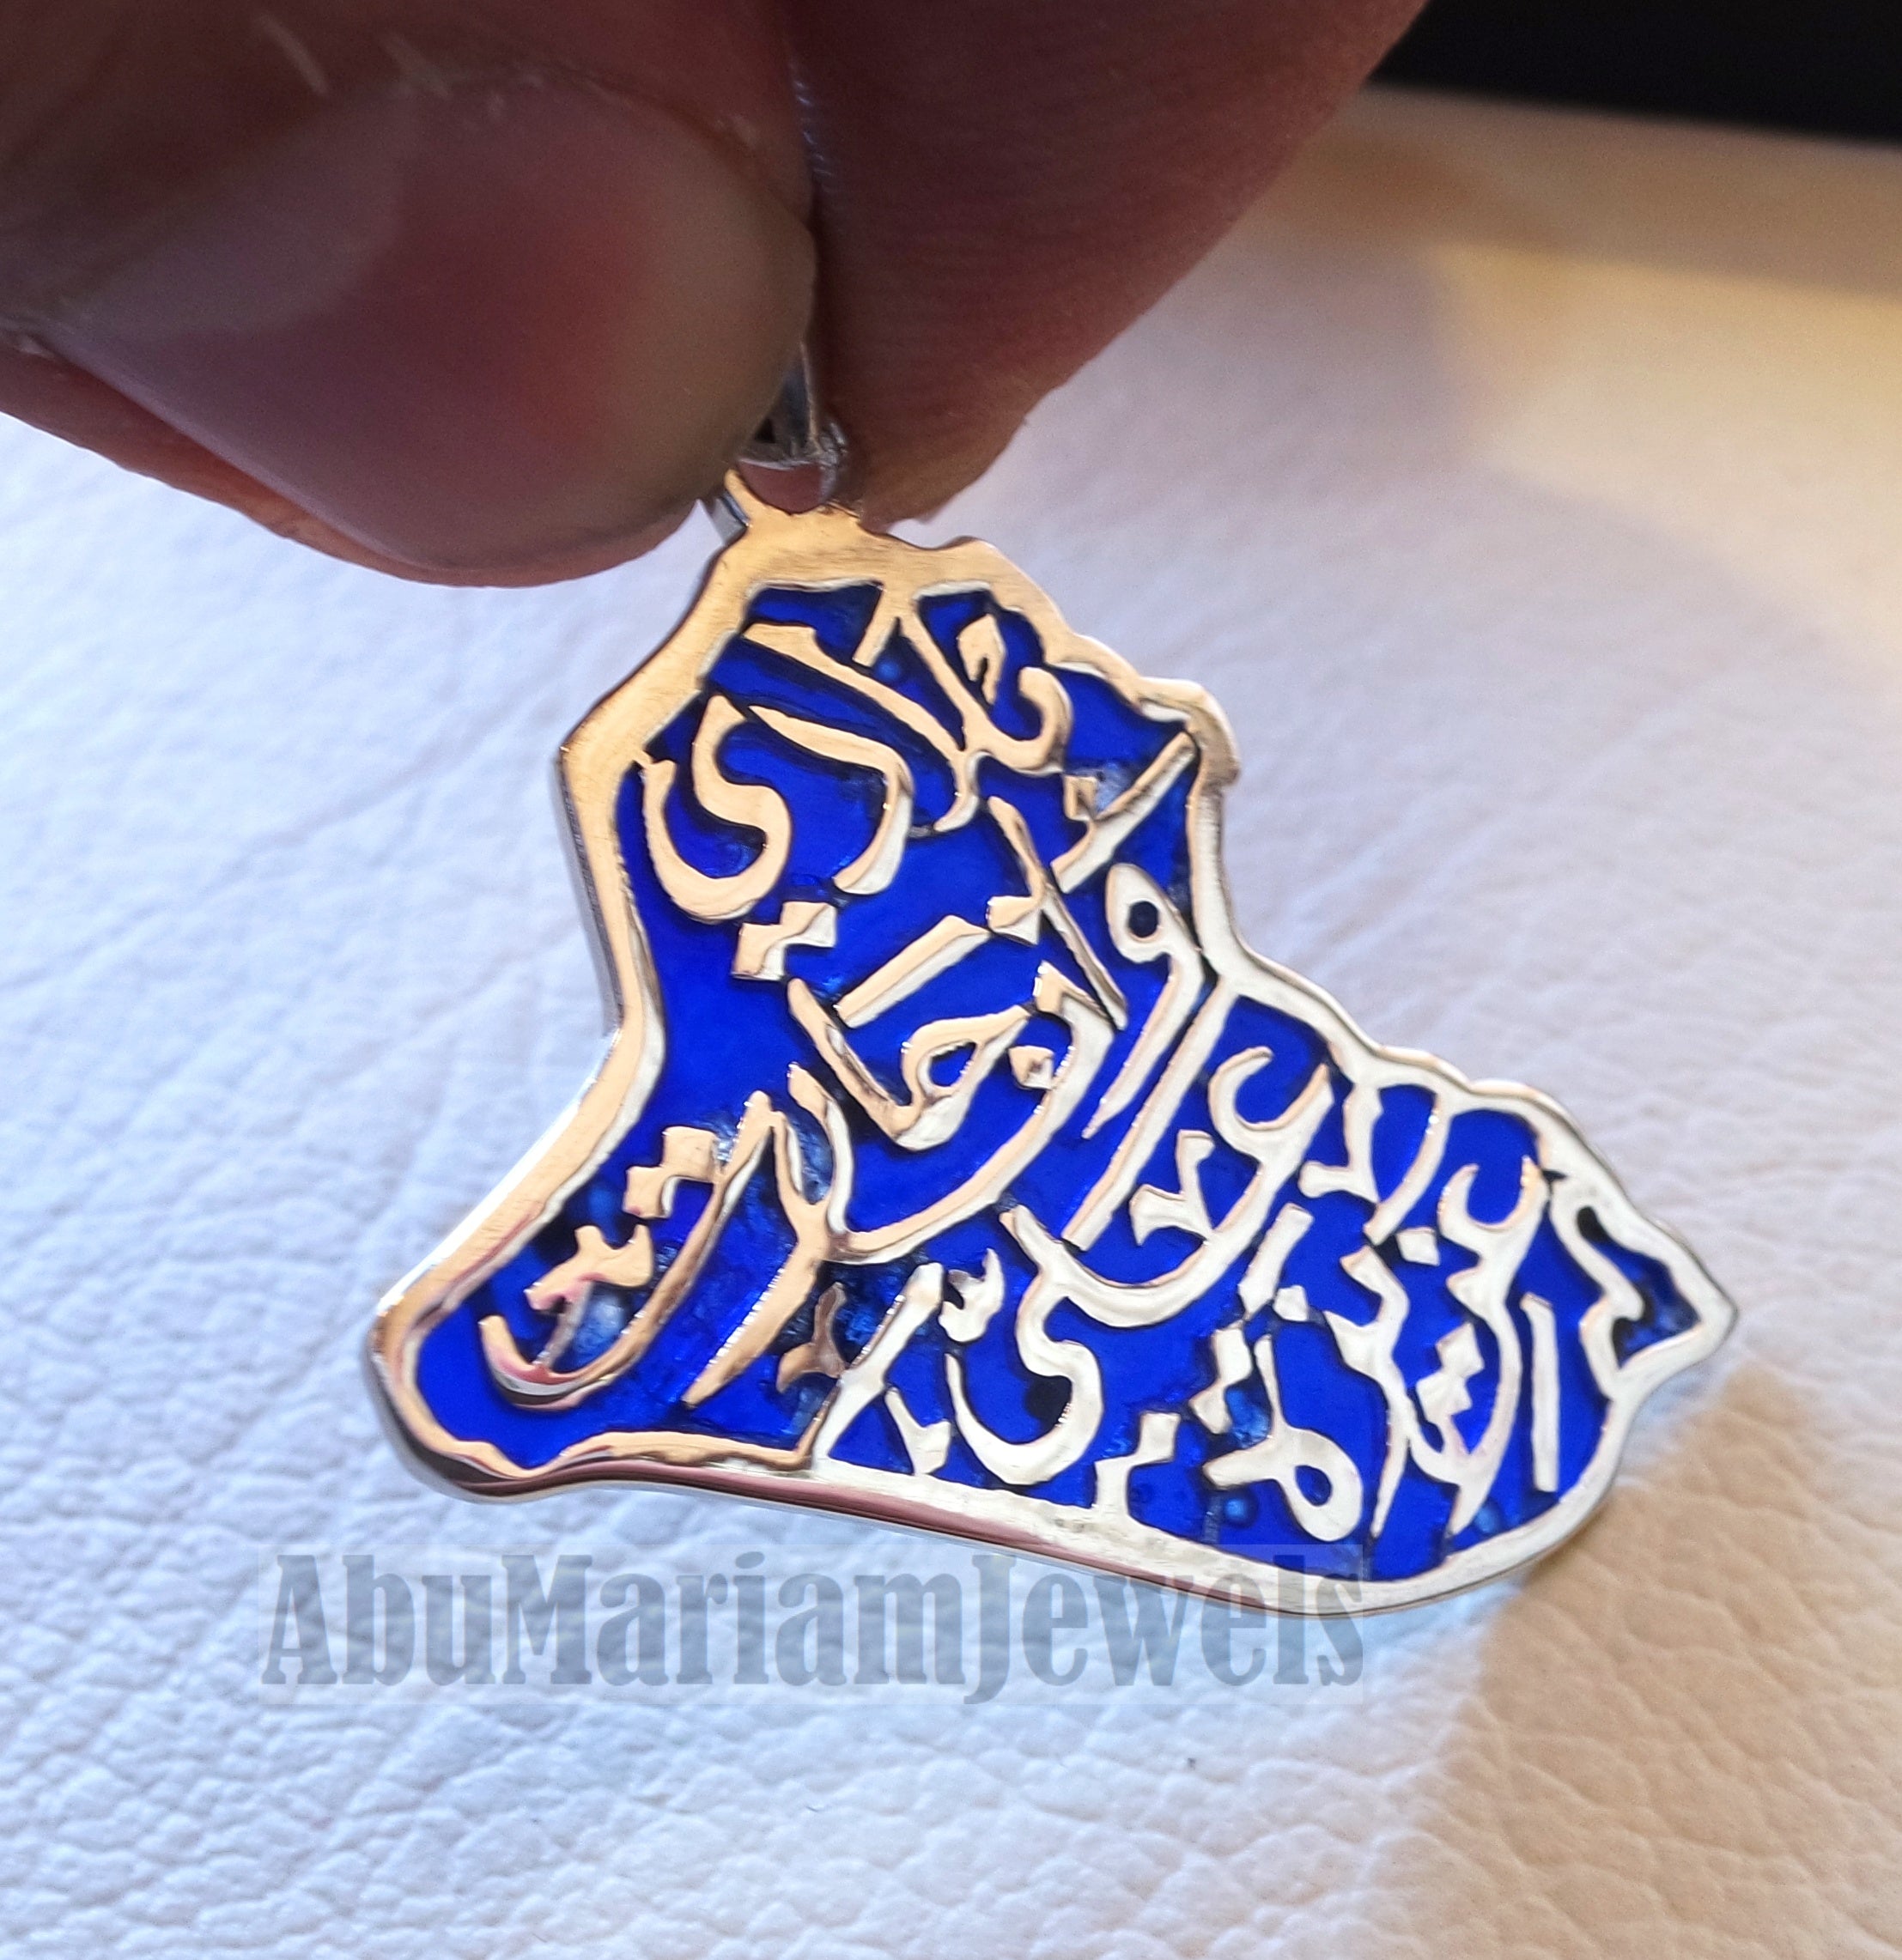 Iraq map with frame pendant with famous poem verse sterling silver 925 with dark blue enamel مينا jewelry arabic fast shipping خارطة العراق